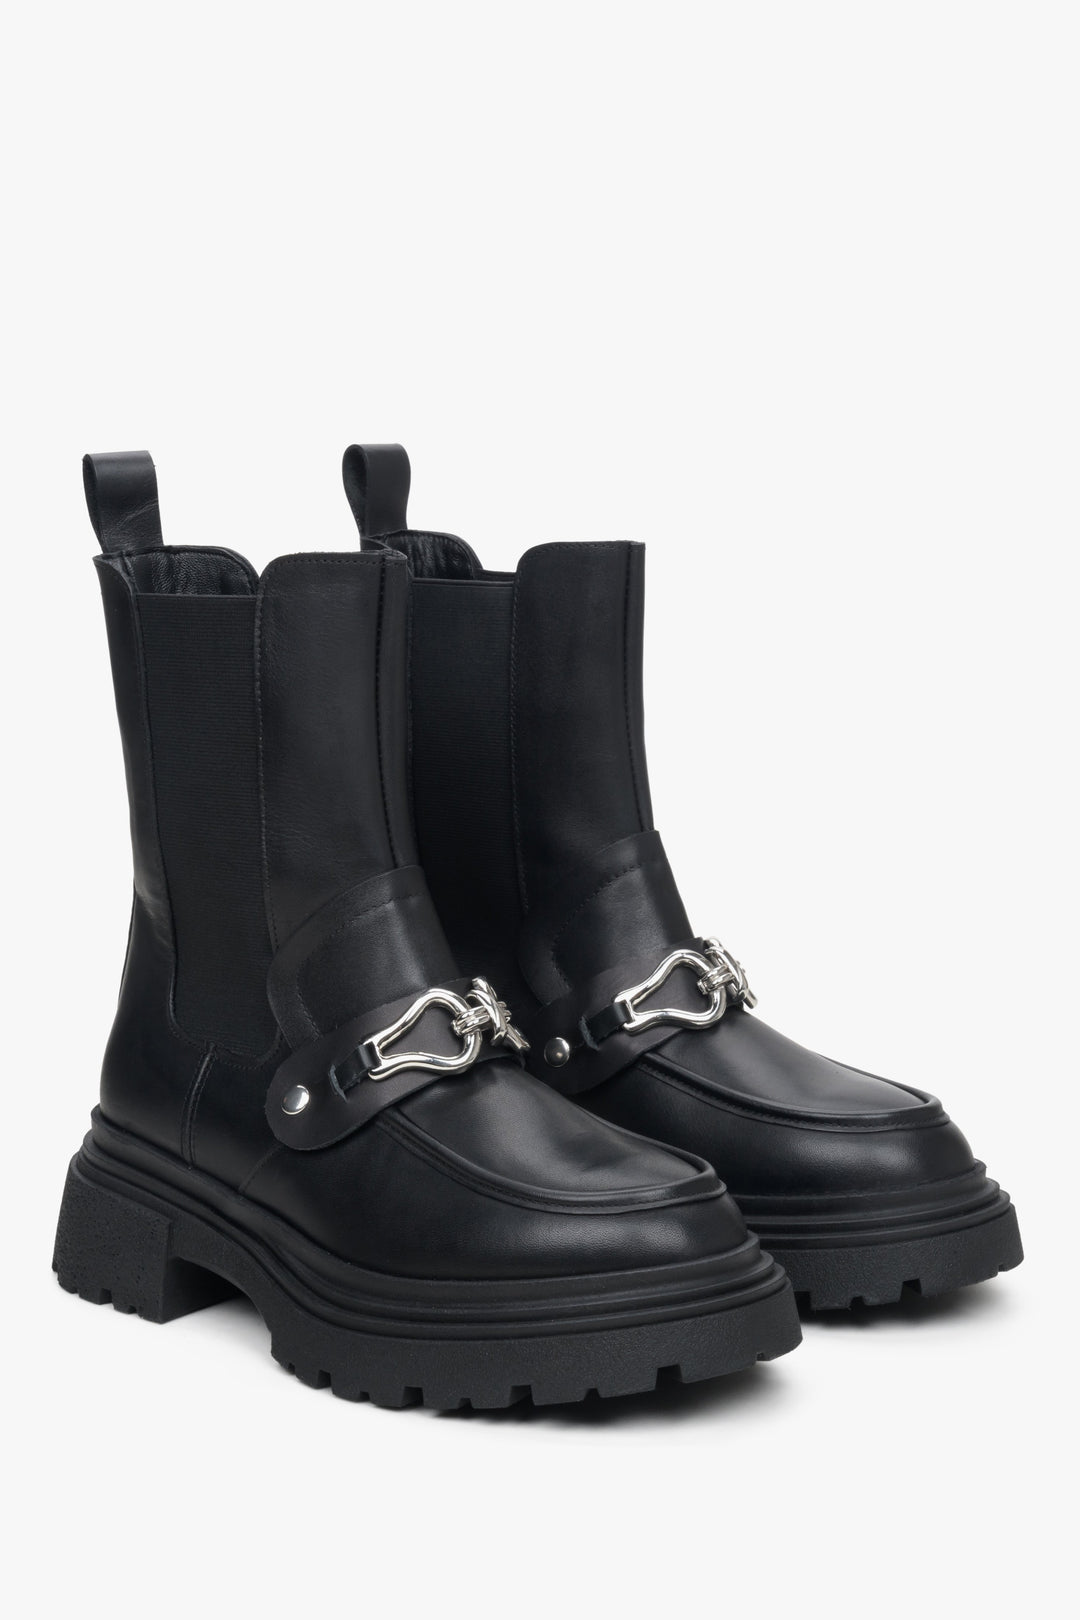 Black leather Chelsea boots by Estro with decorative embellishment.